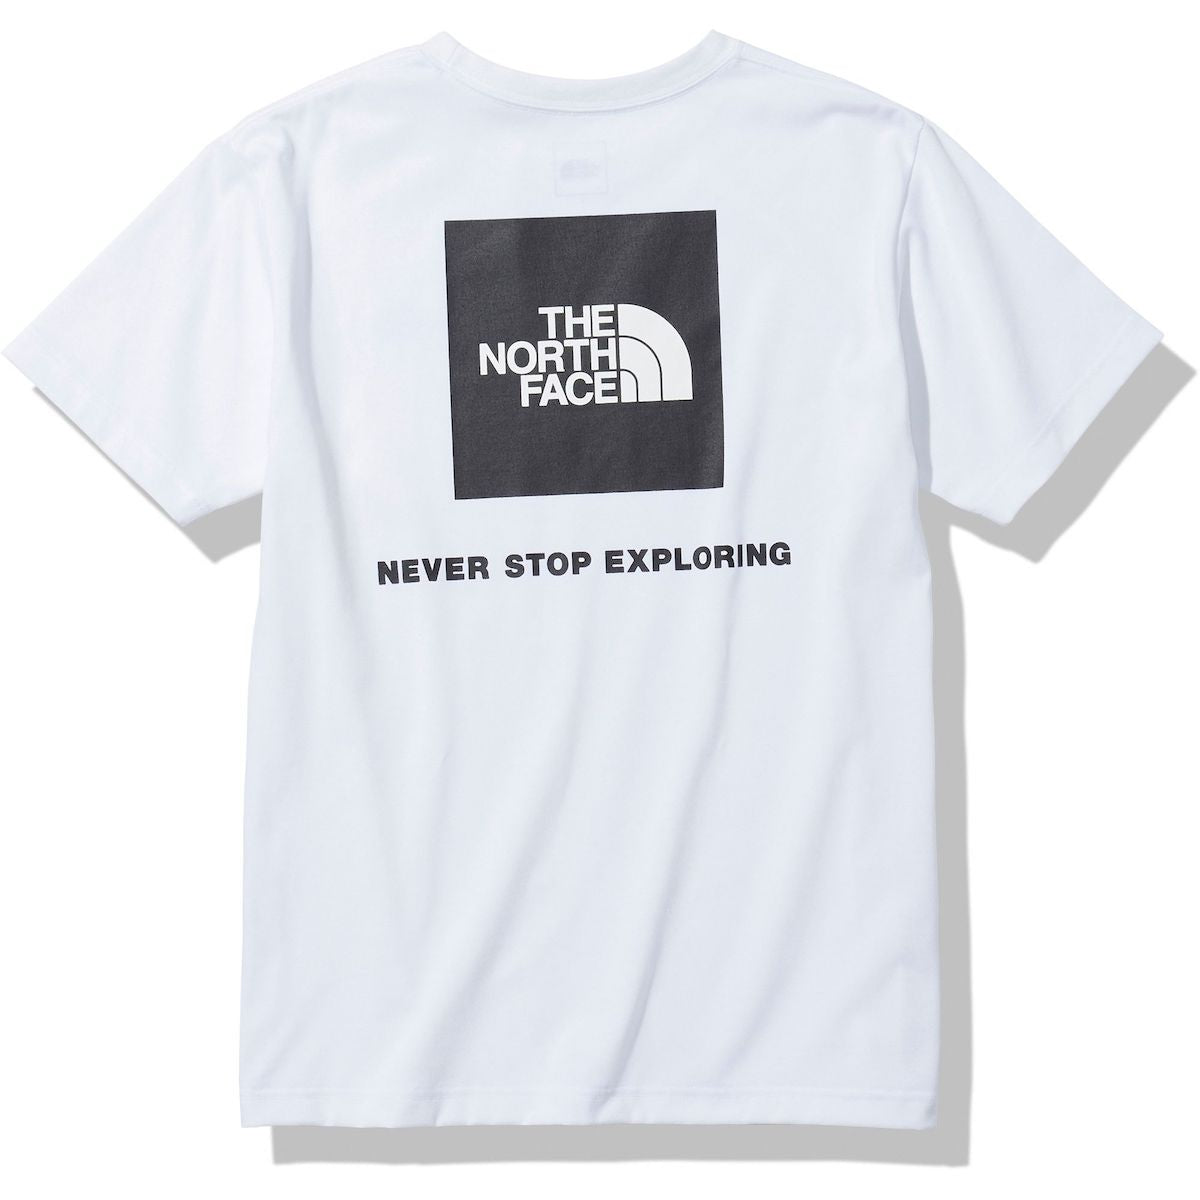 THE NORTH FACE S/S Back Square Logo Tee